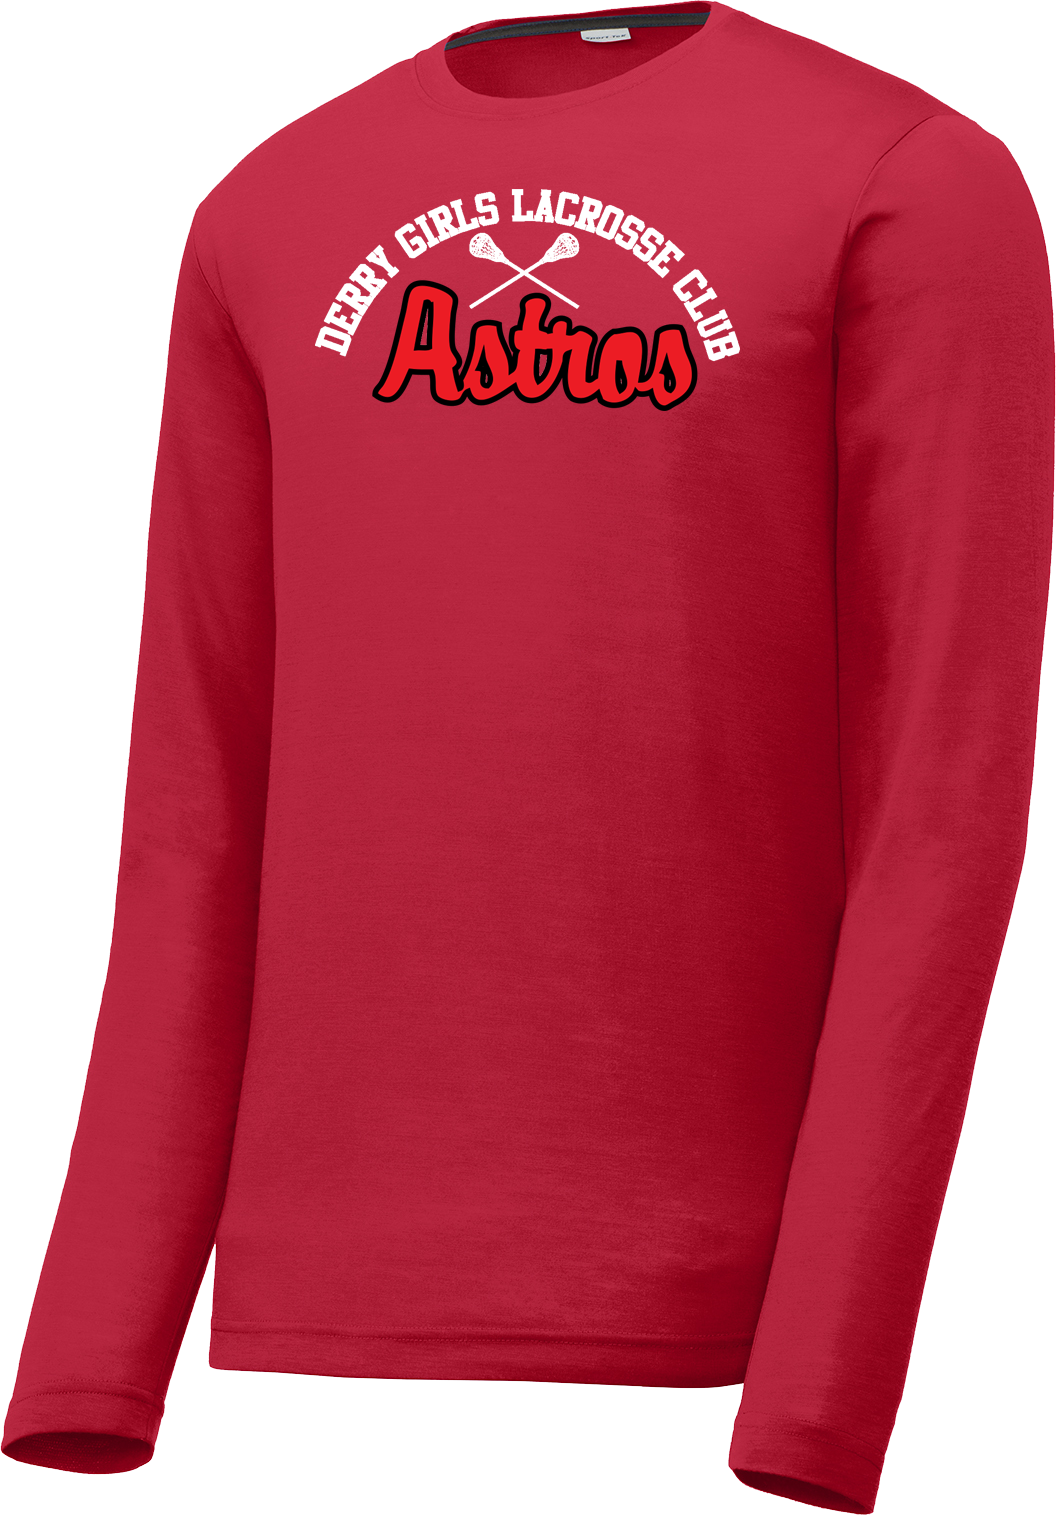 Derry Girls Lacrosse Men's Red Long Sleeve CottonTouch Performance Shirt